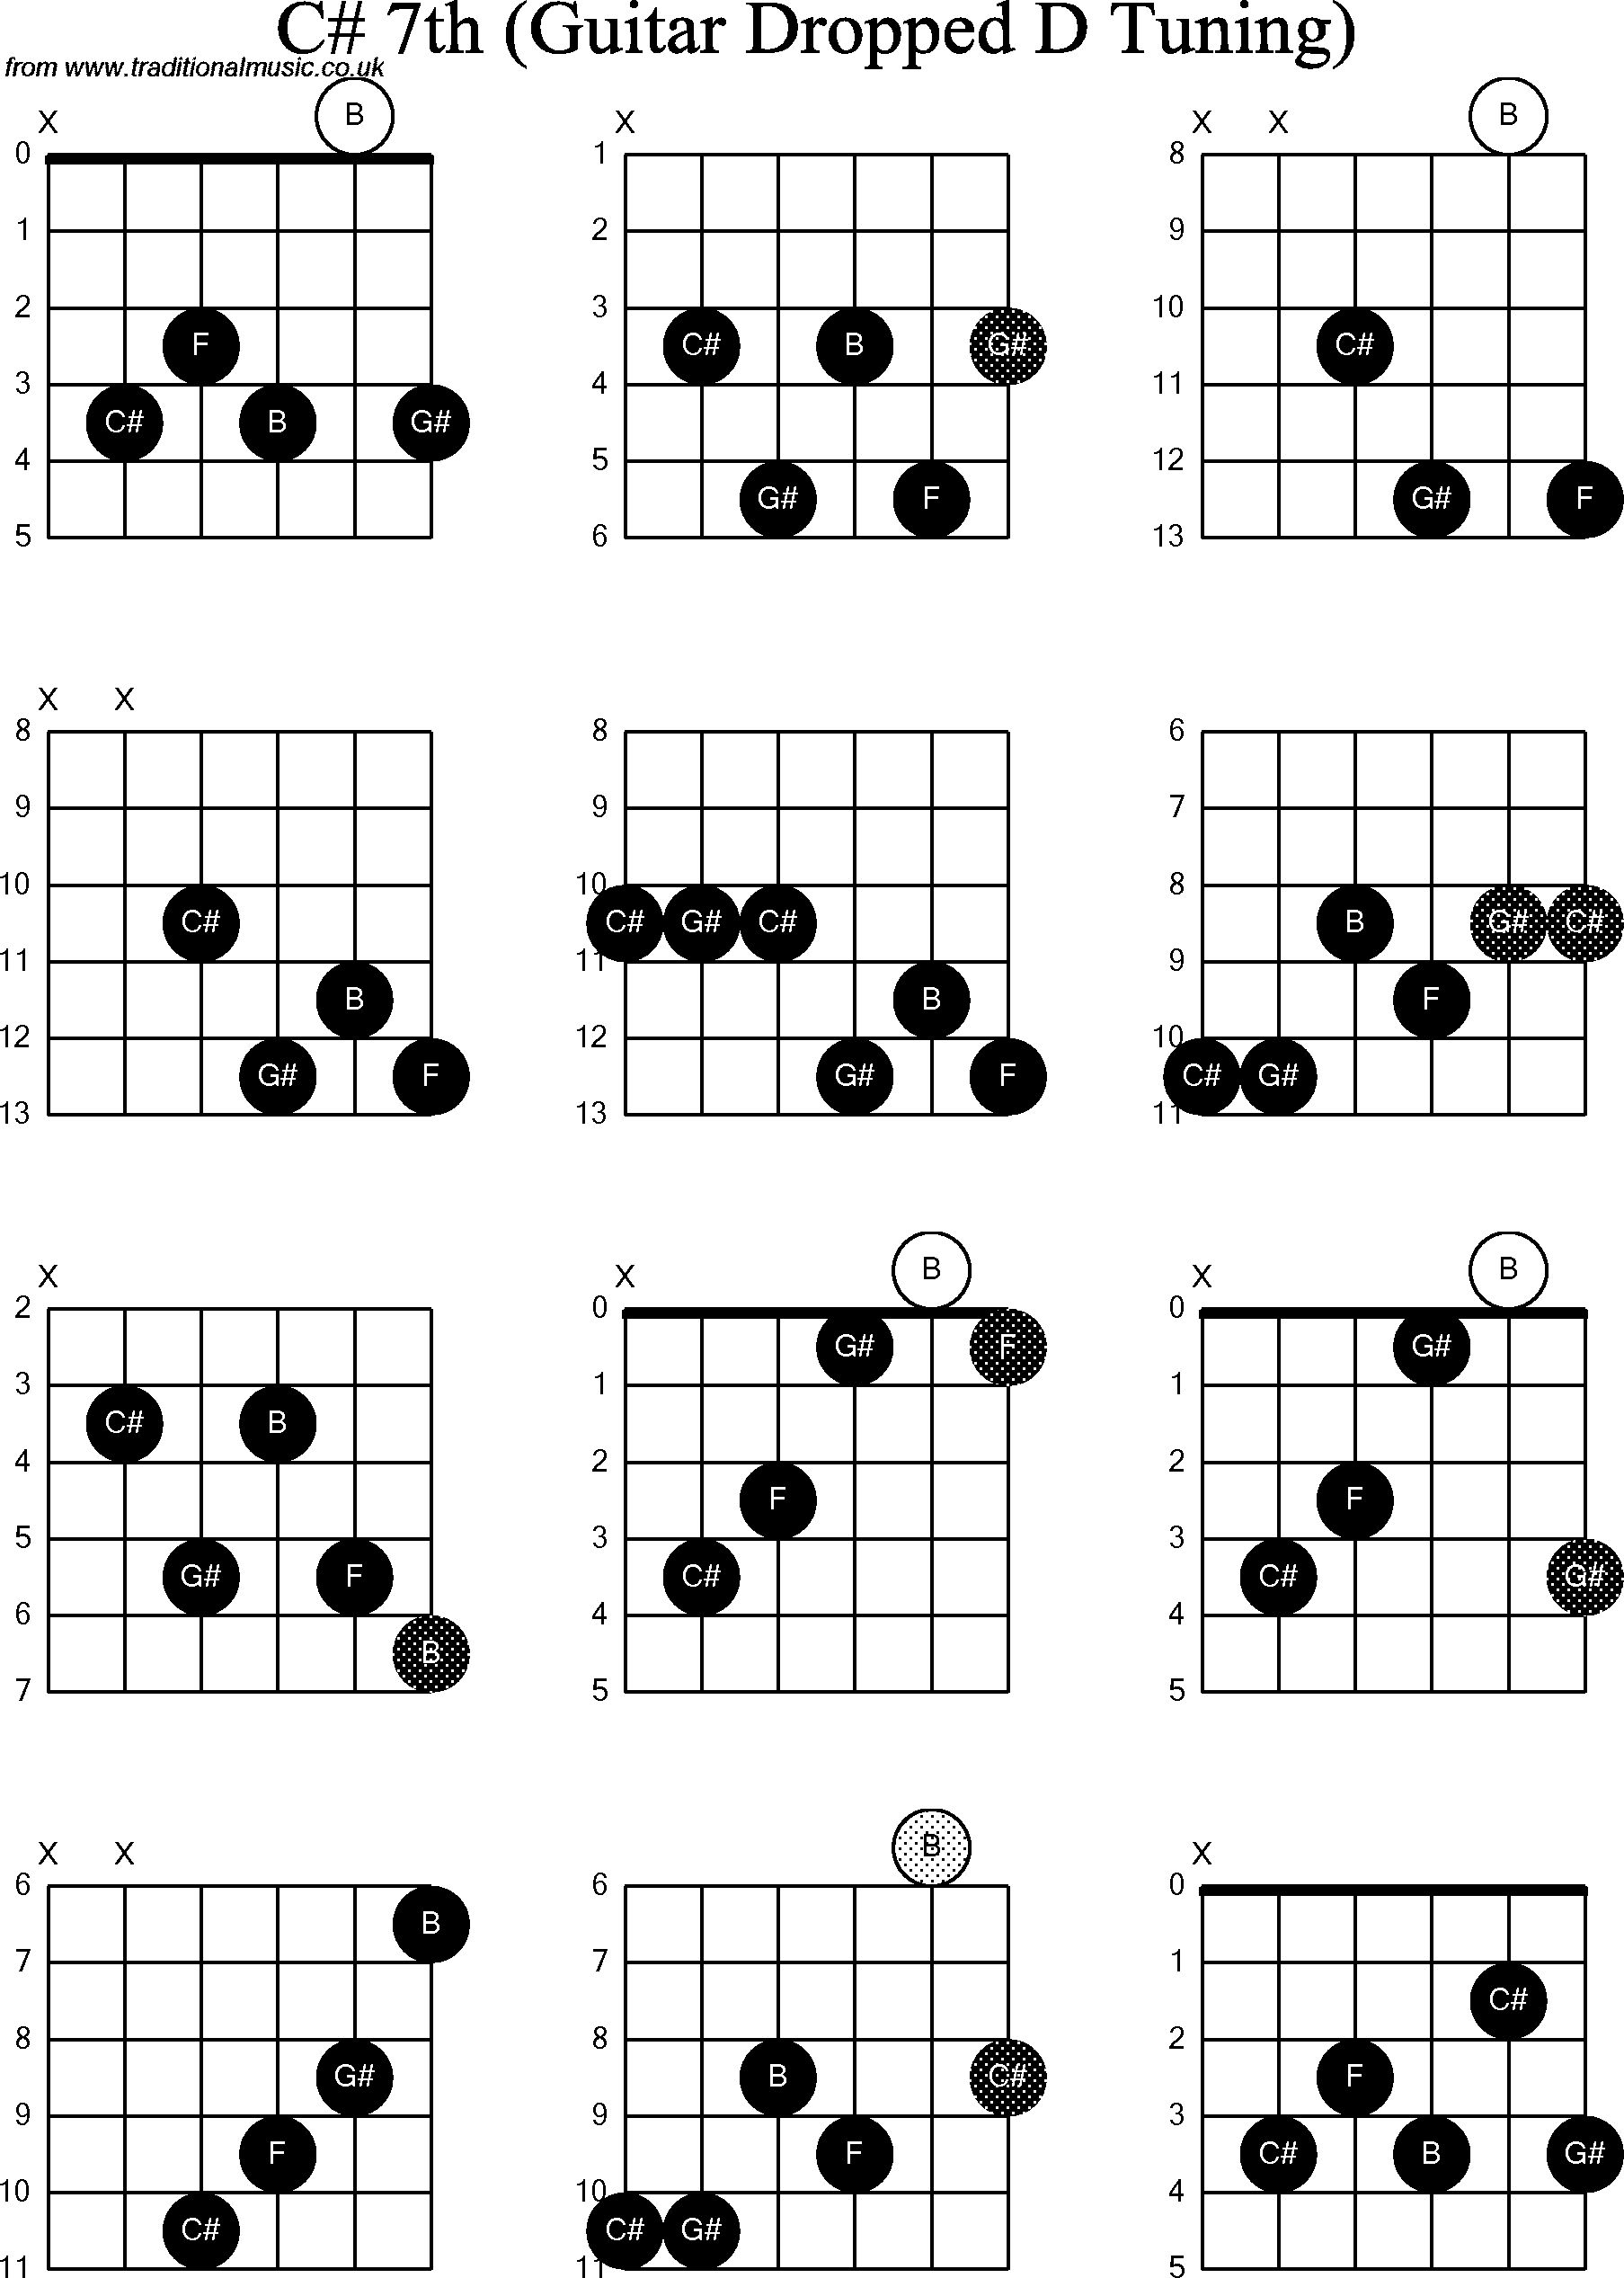 Chord diagrams for dropped D Guitar(DADGBE), C Sharp7th